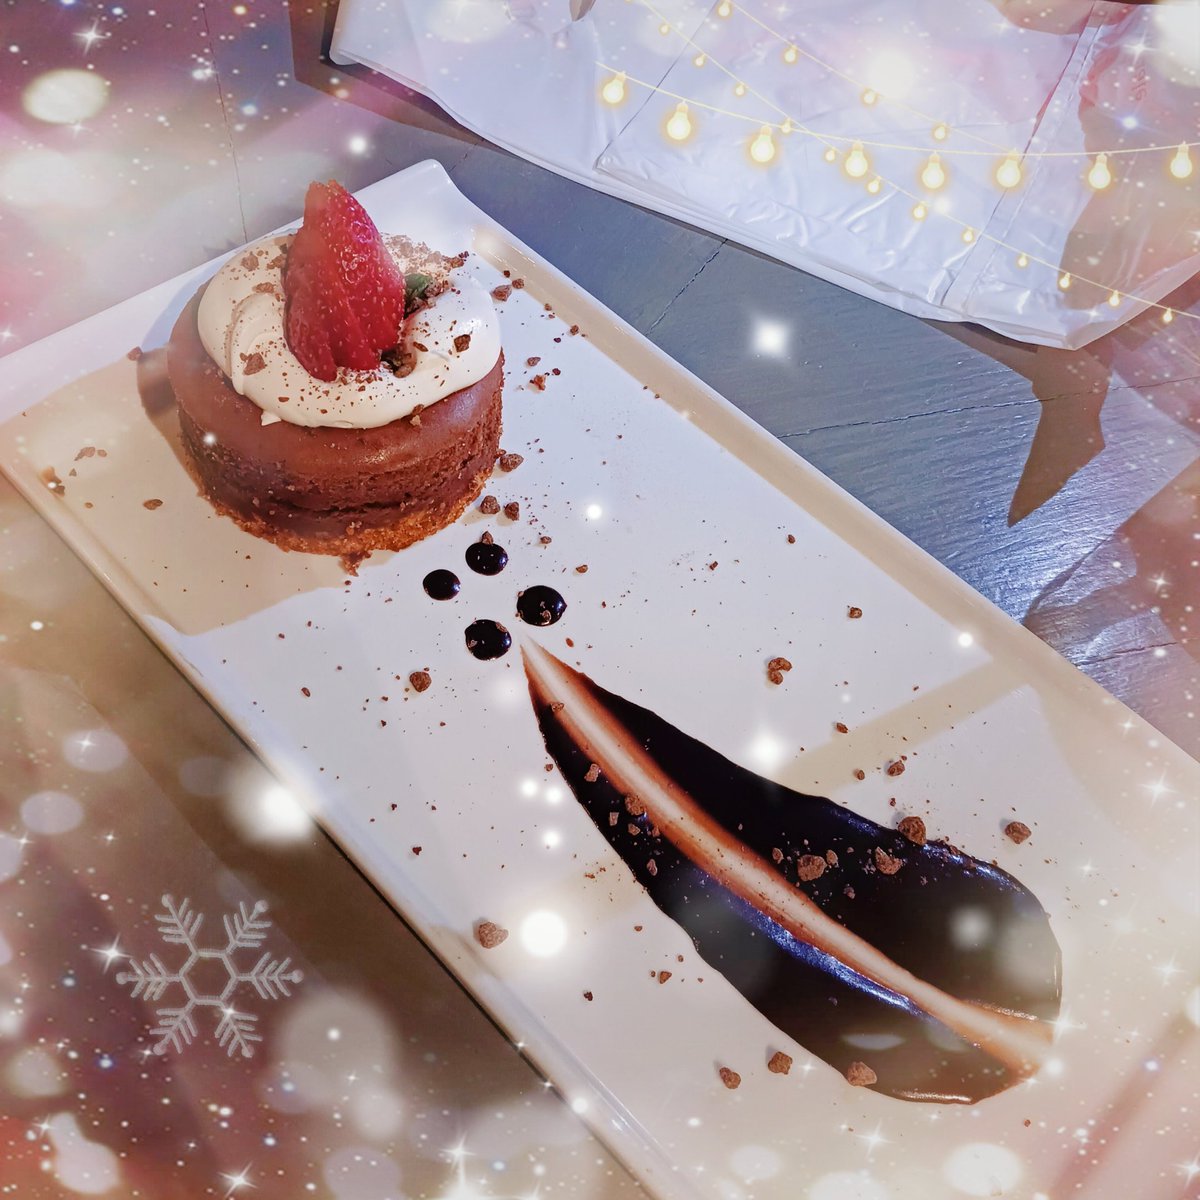 「Had the best cheesecake of my life last 」|Zambicandy (not really here)のイラスト